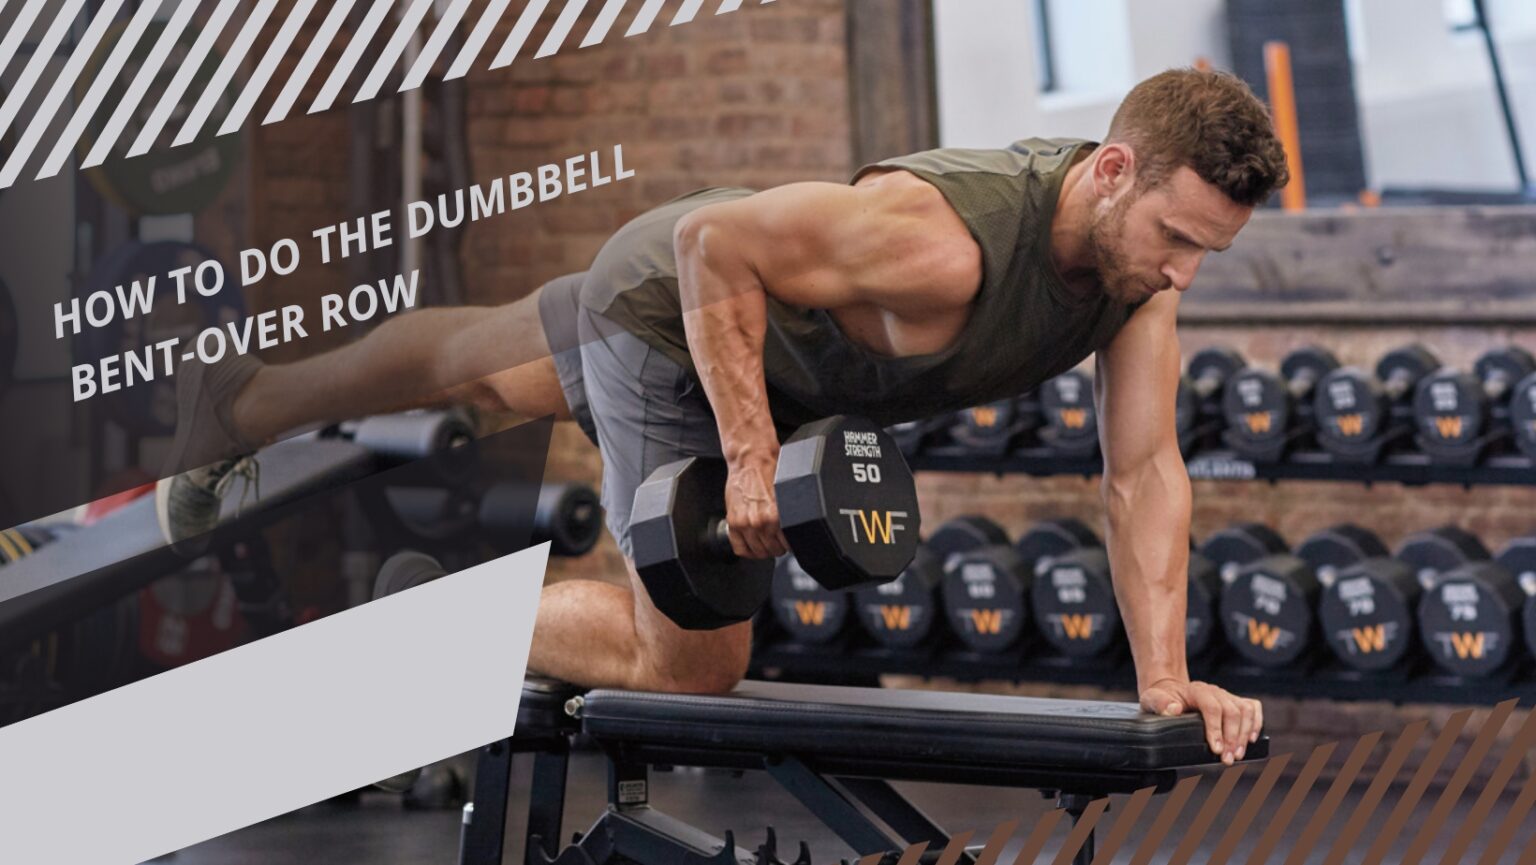 A Complete Guide On How To Do The Dumbbell Bent Over Row Boston Rock Gym 